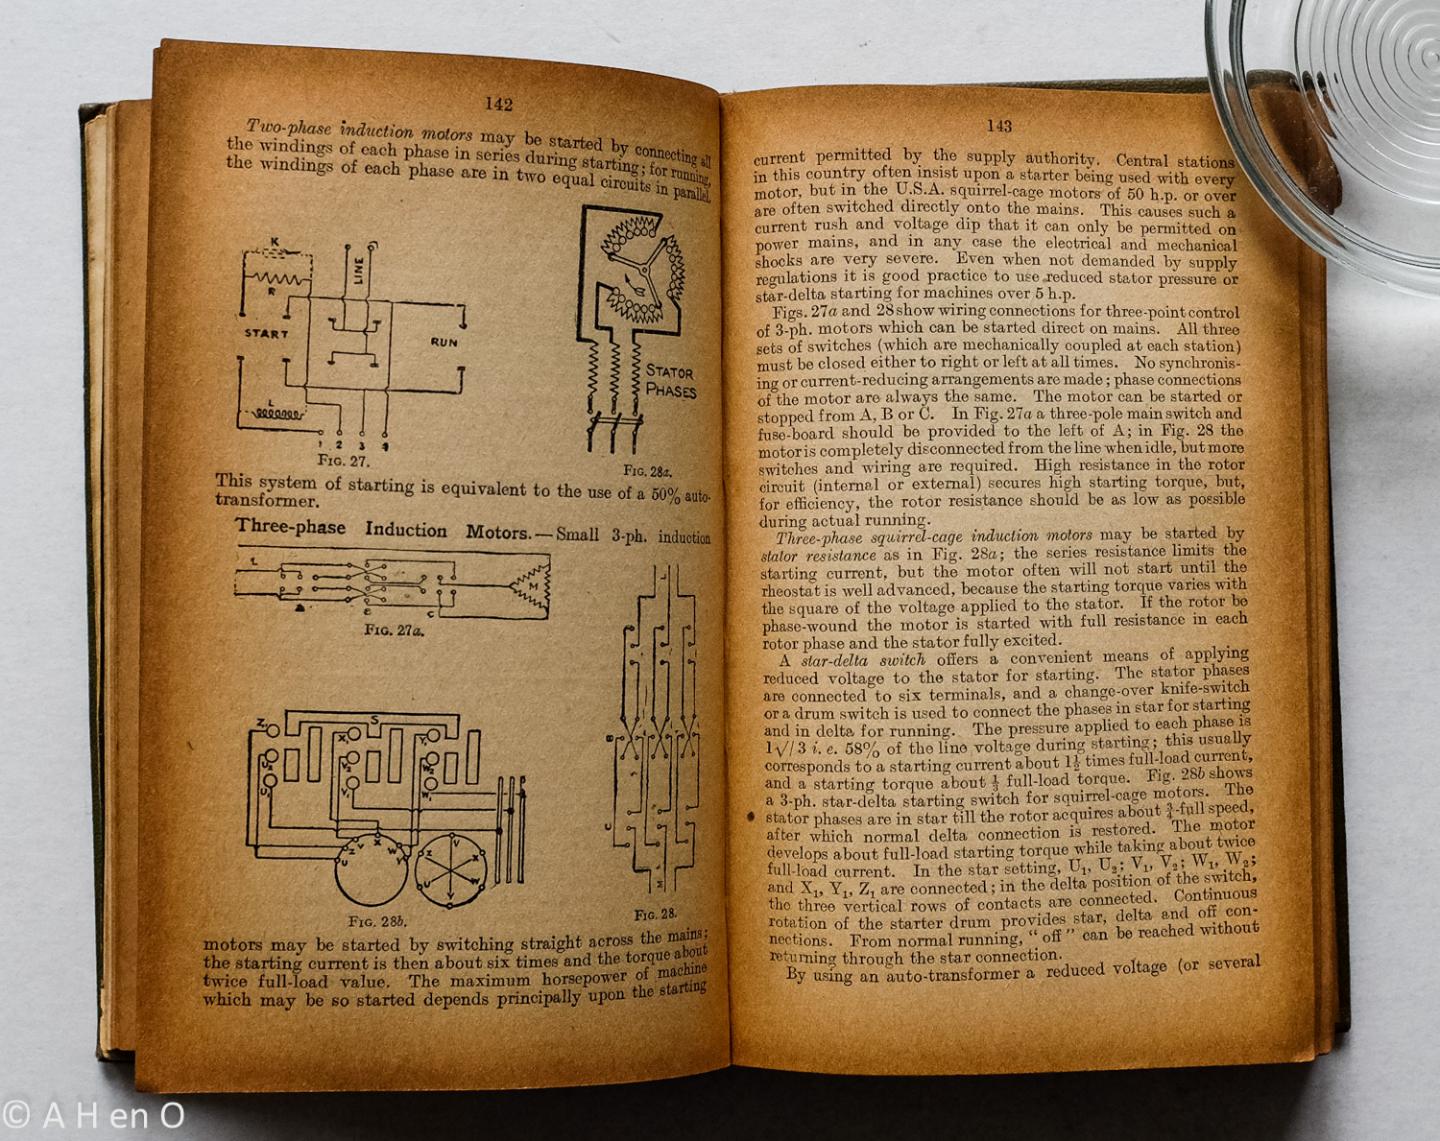 Mechanical World - The "Mechanical World" electrical pocketbook 1925 : a collection of electrical engineering notes, rules, tables and data.